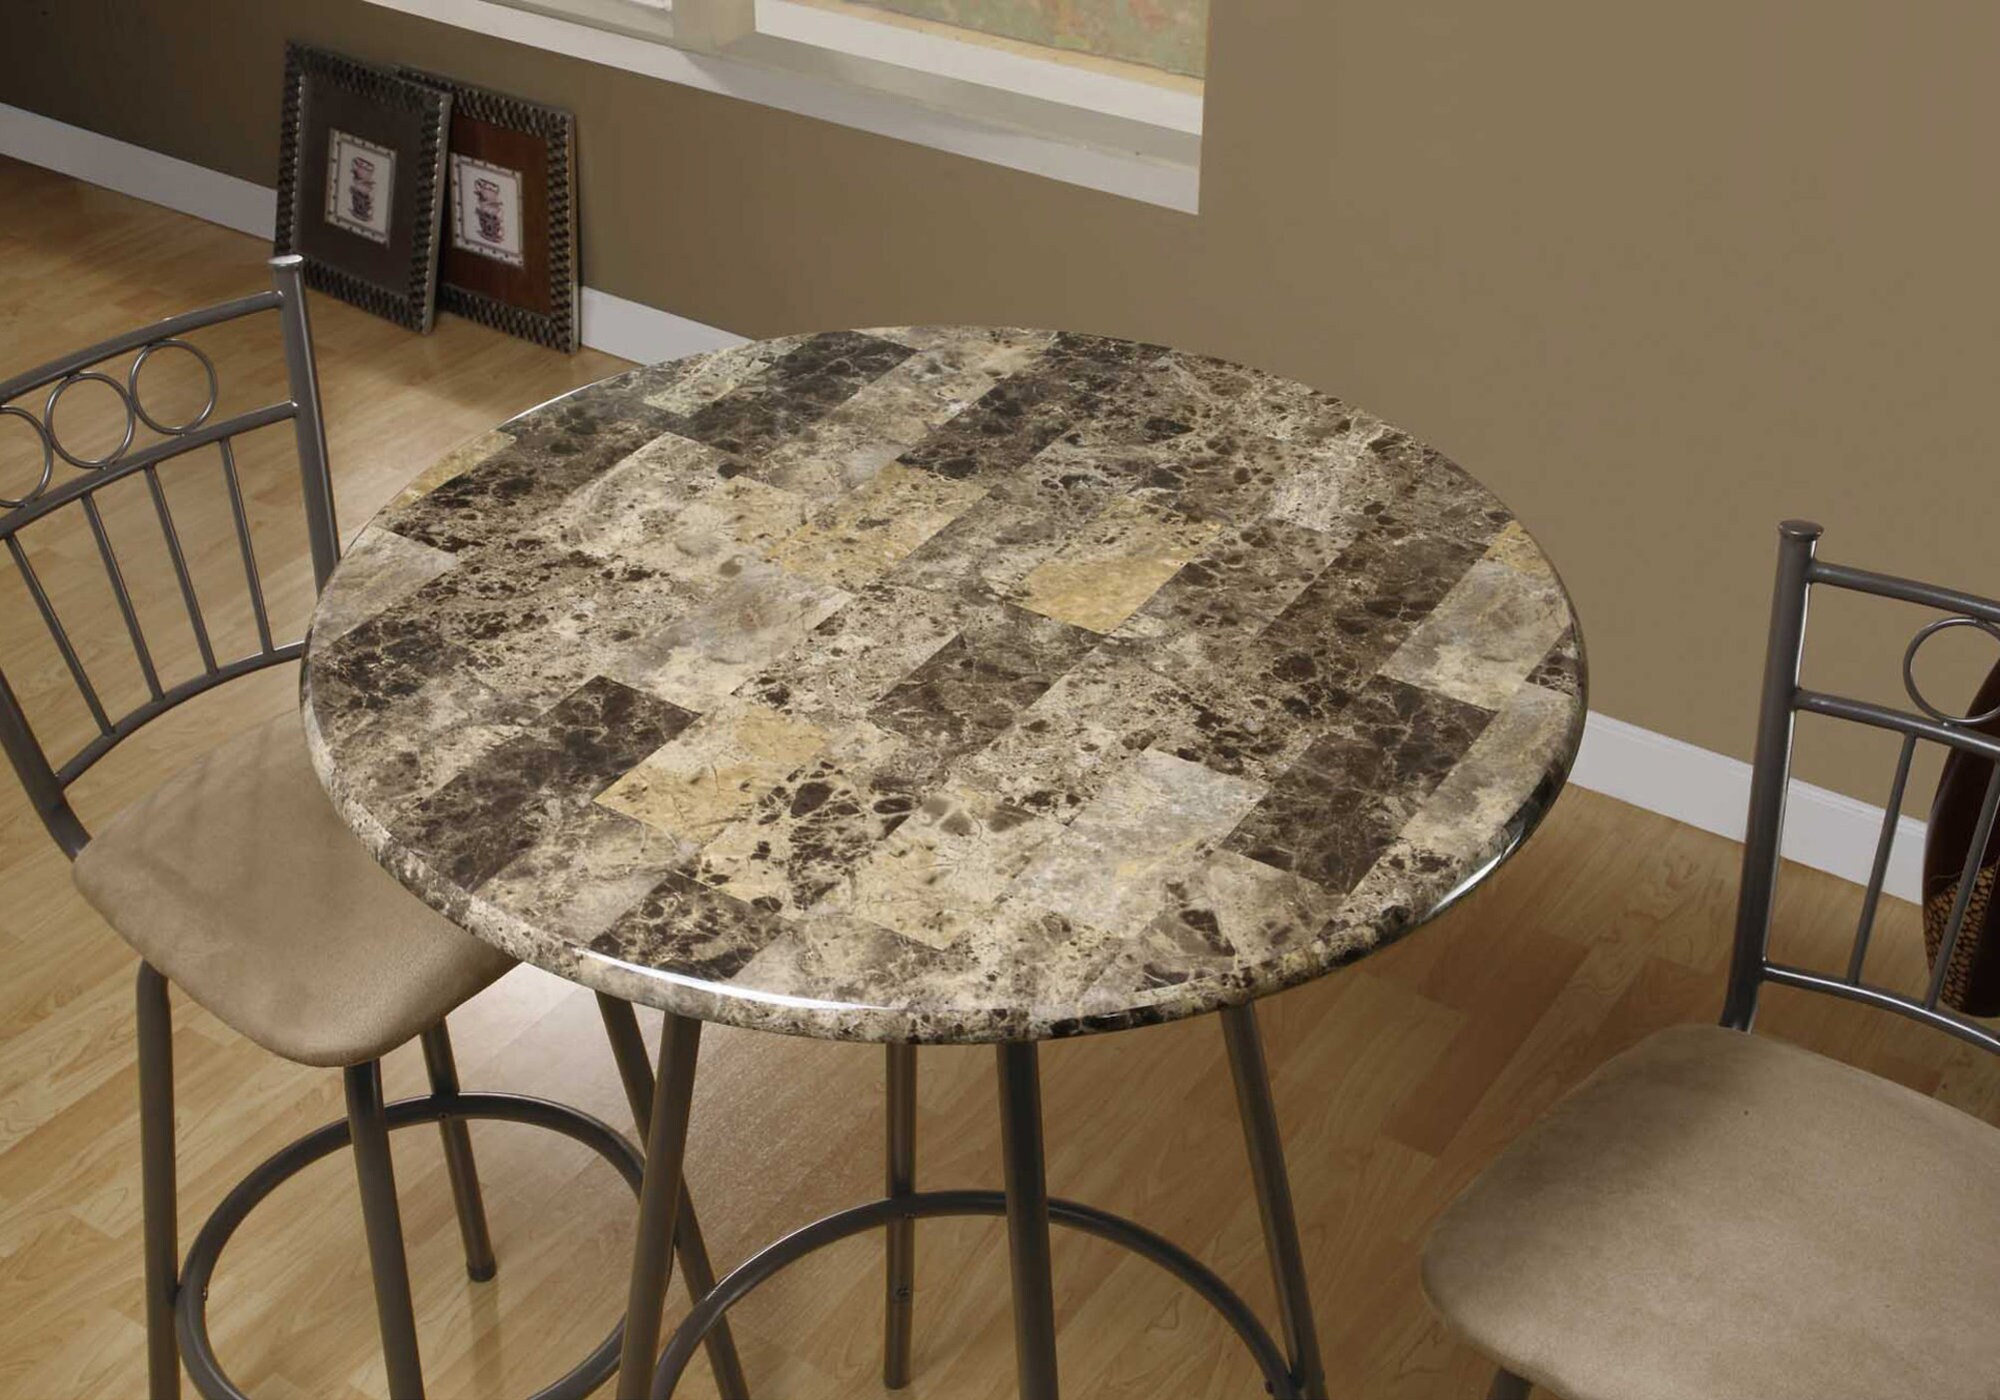 Dark Base Bar Brown Dark Marble x Round L in Faux Table, department H 42-in the Coffee Monarch Specialties Transitional Metal at 30-in Dining with Tables